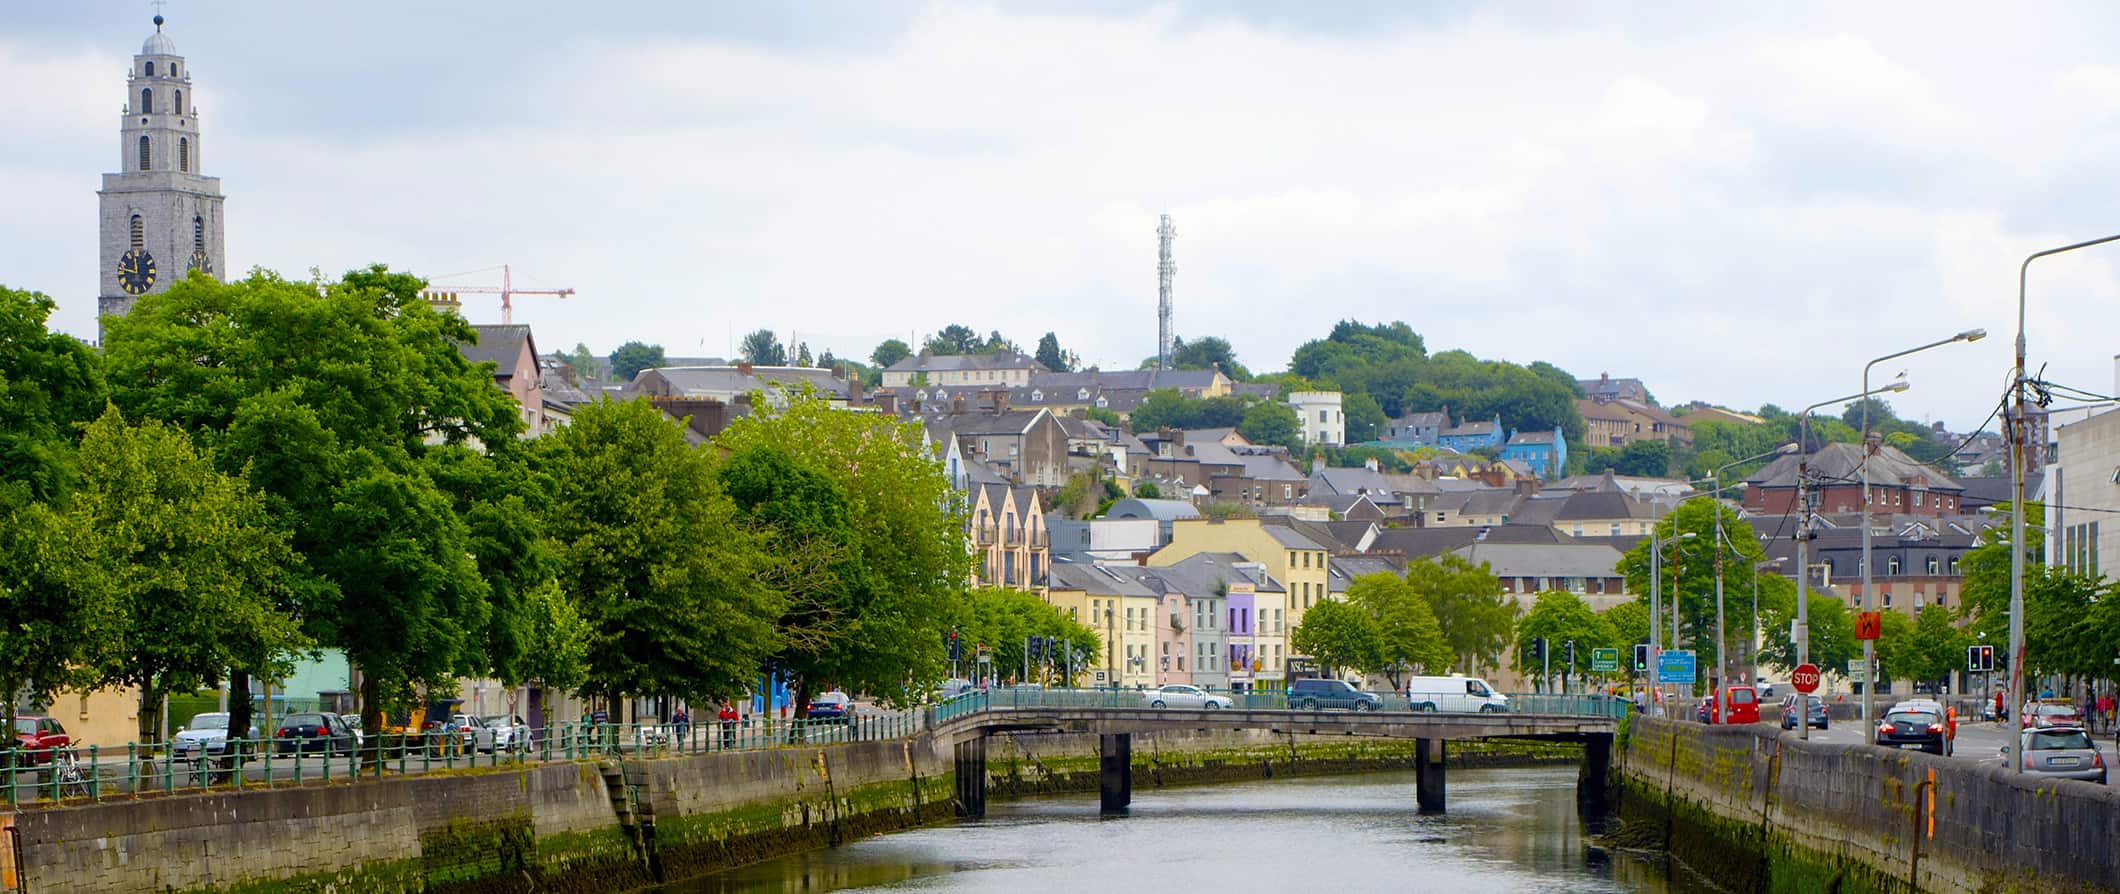 along the river in Cork, Ireland